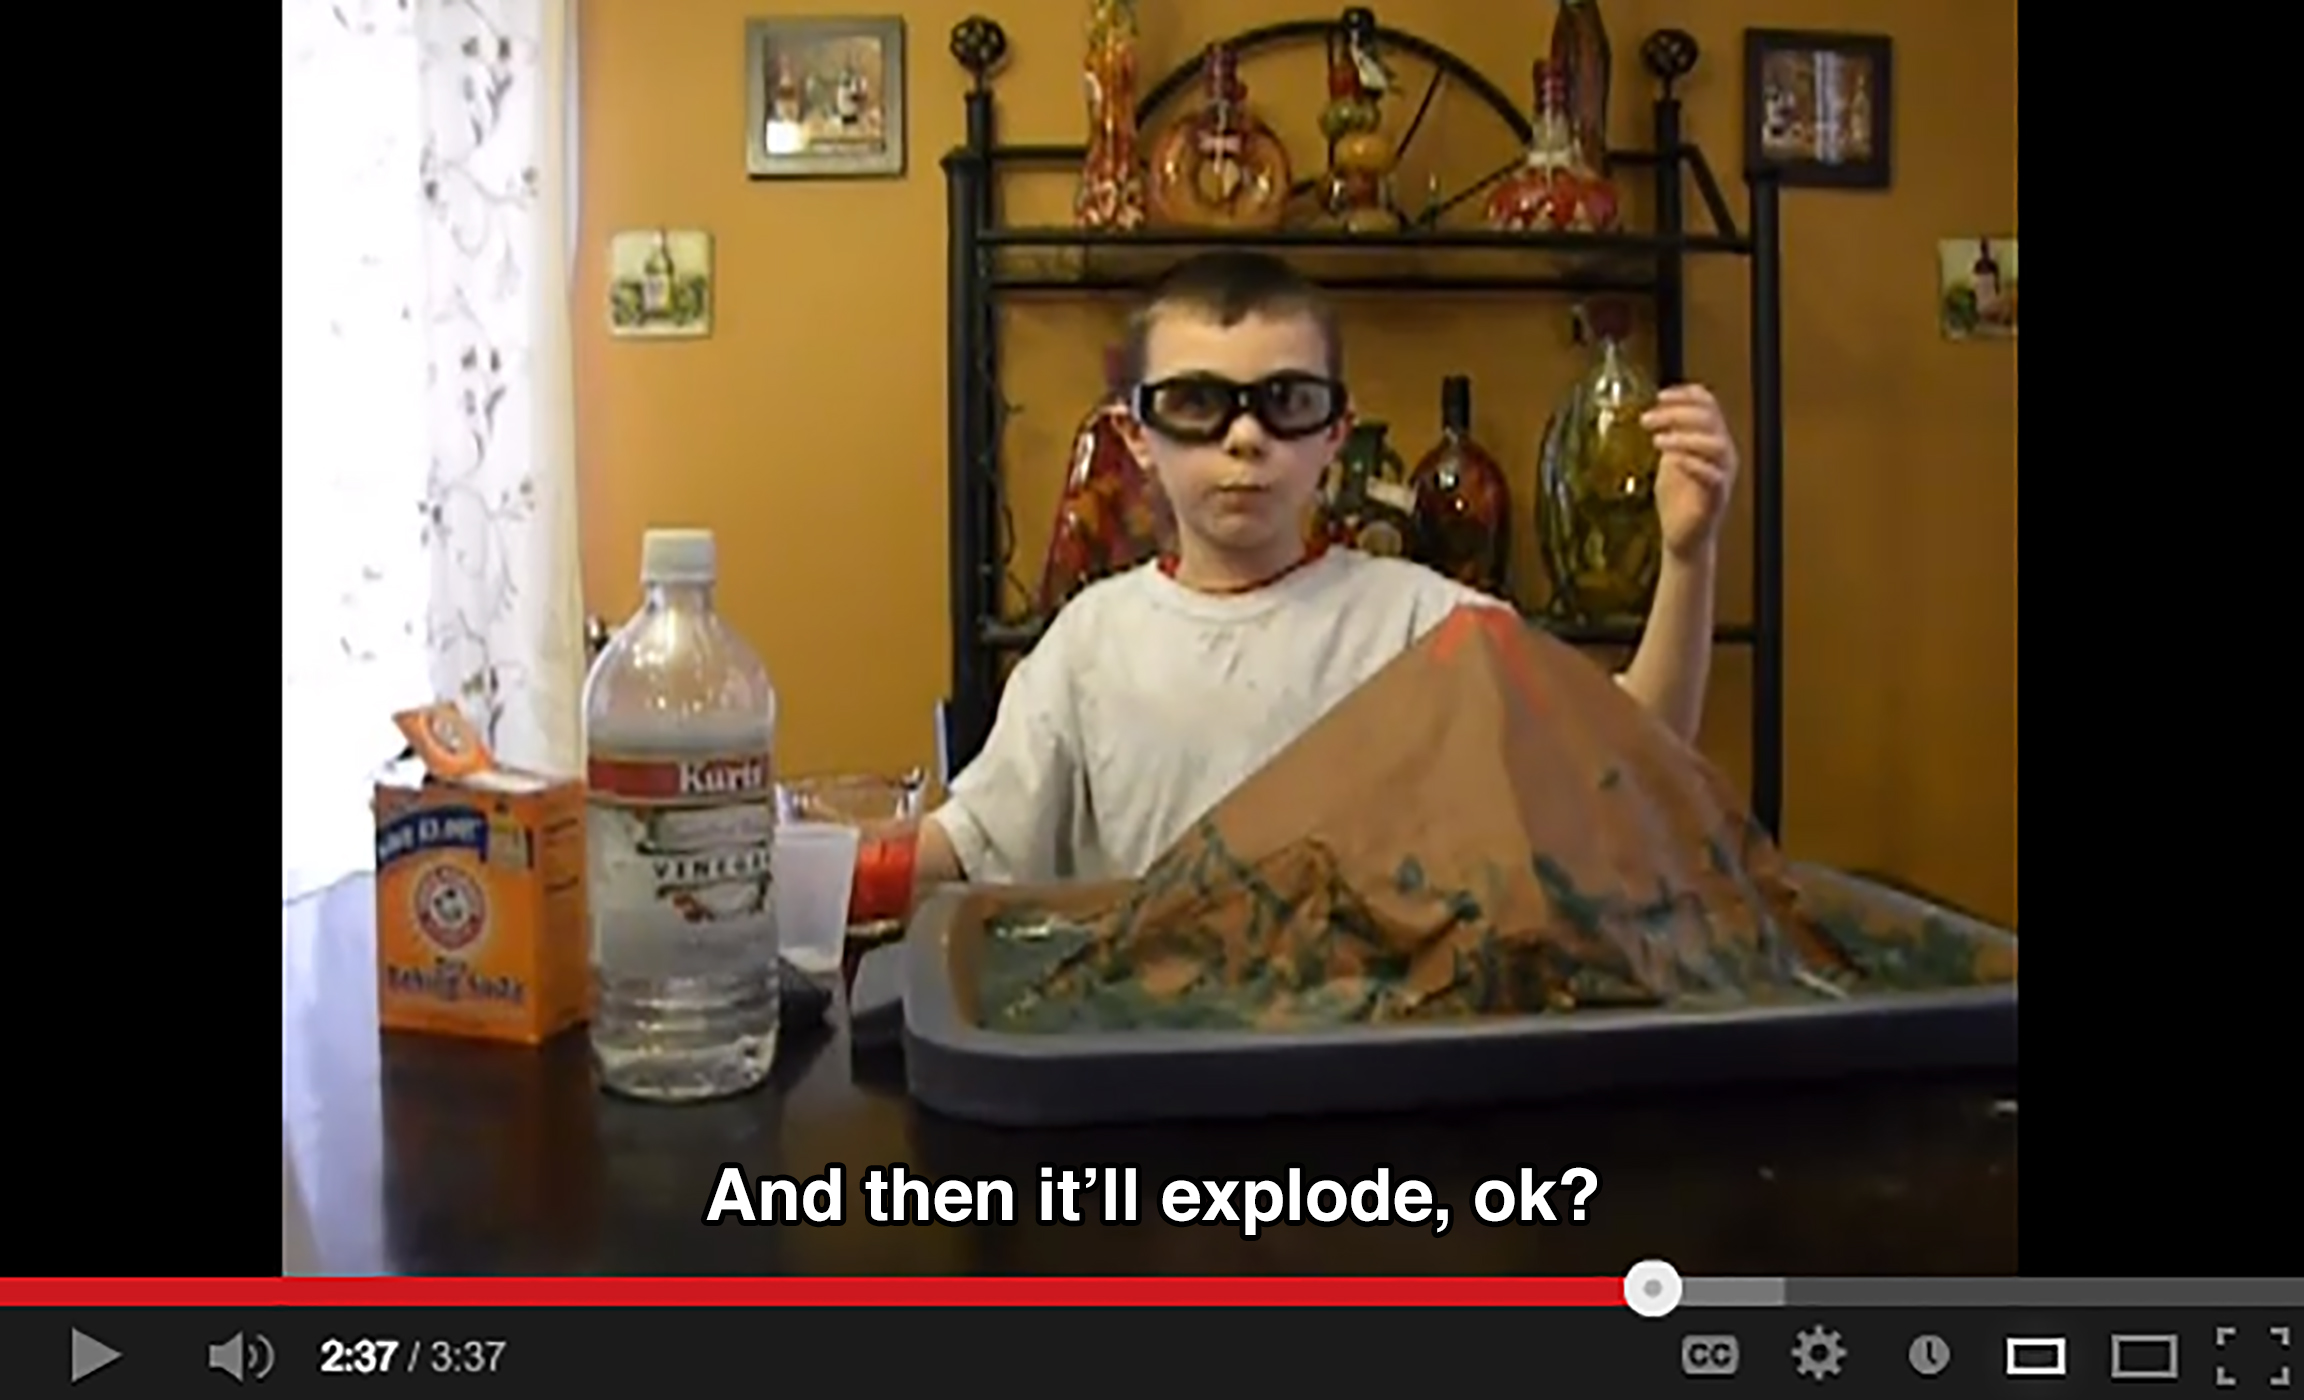 A young boy wearing goggles in a living room stands behind a model of a volcano, a bottle of vinegar, and baking soda, and says: And then it'll explode, ok?